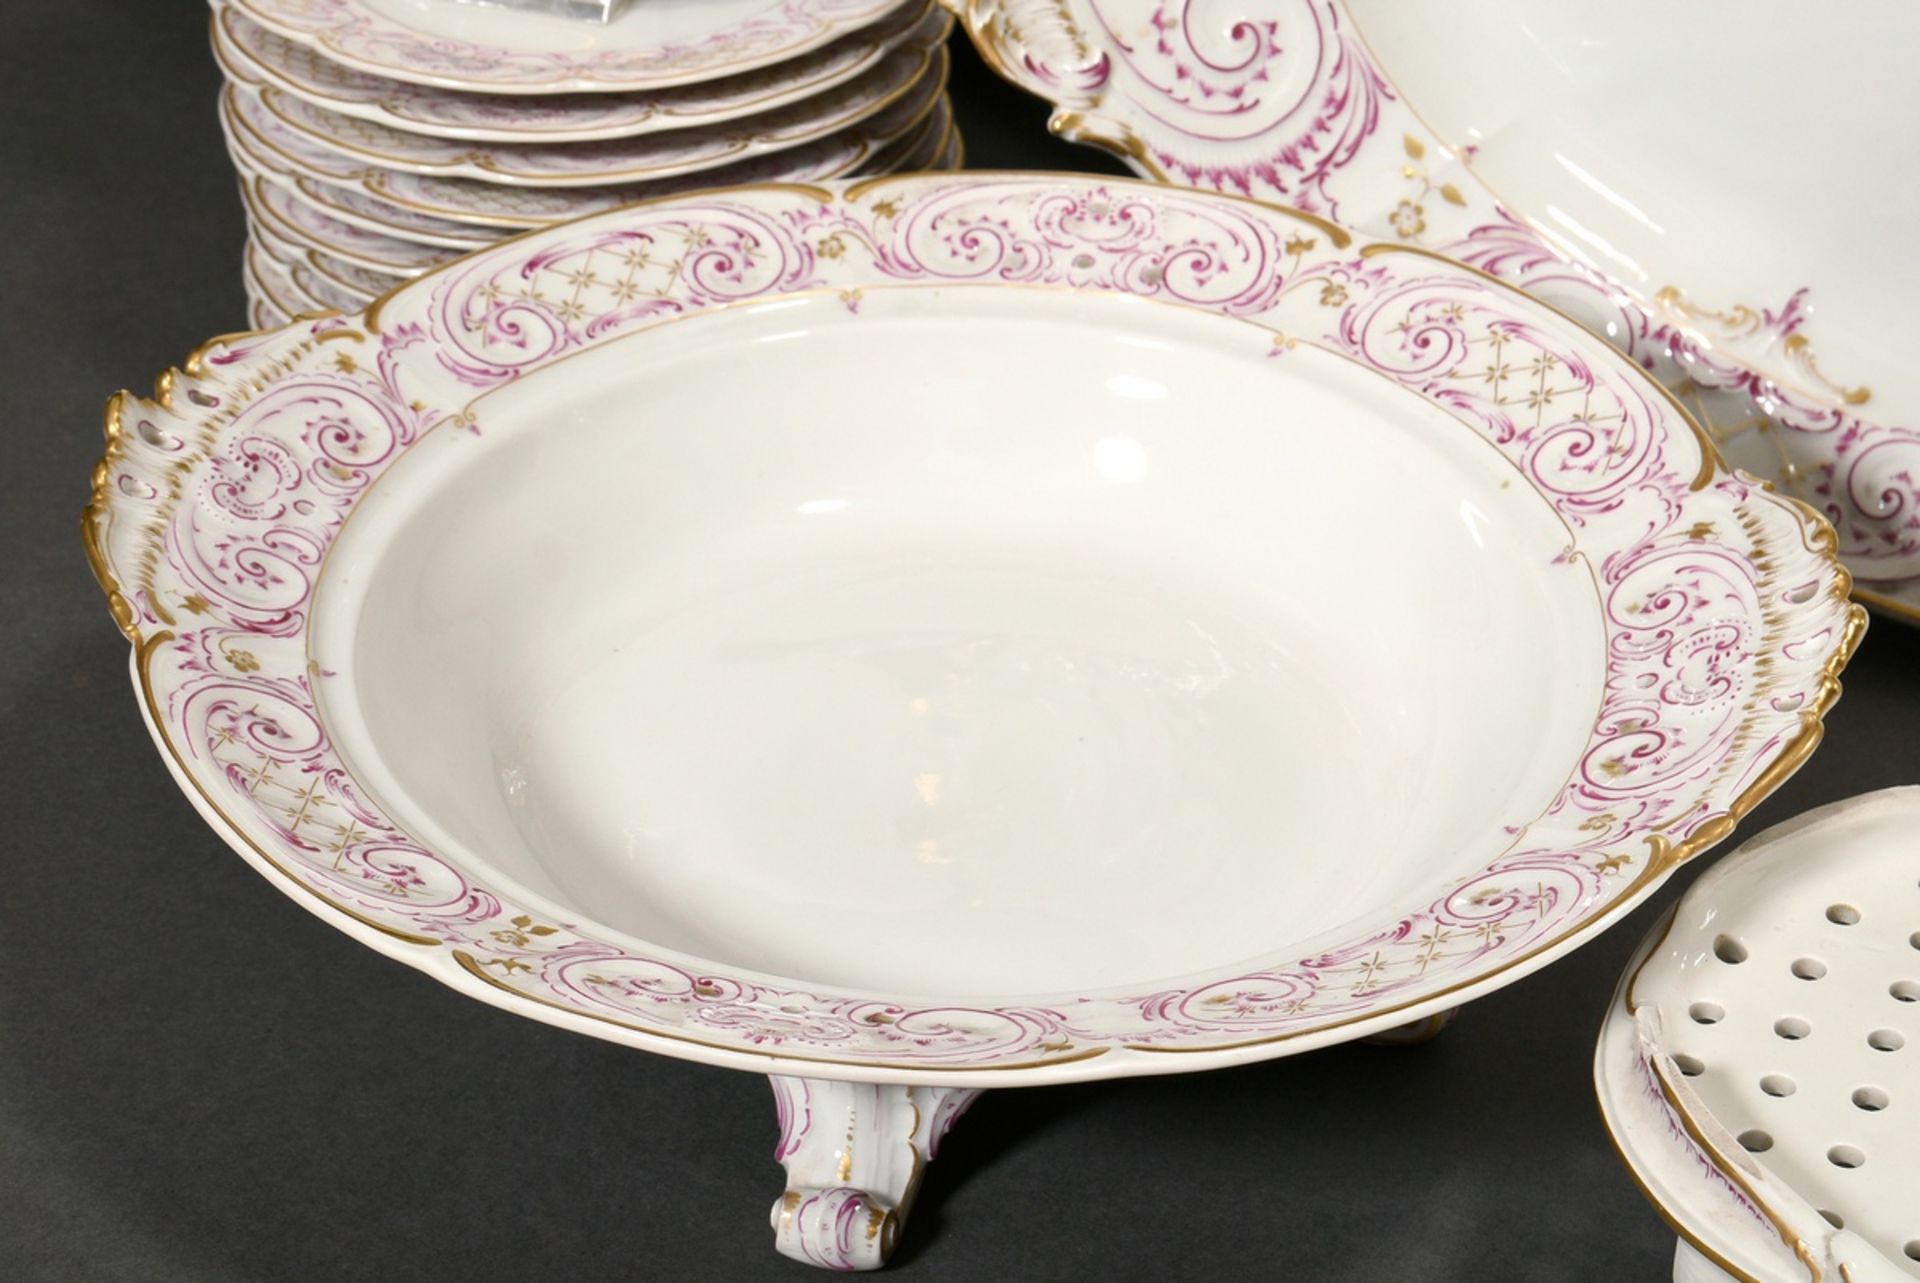 69 Pieces KPM dinner service in Rococo form with purple and gold staffage, red imperial orb mark, c - Image 14 of 22